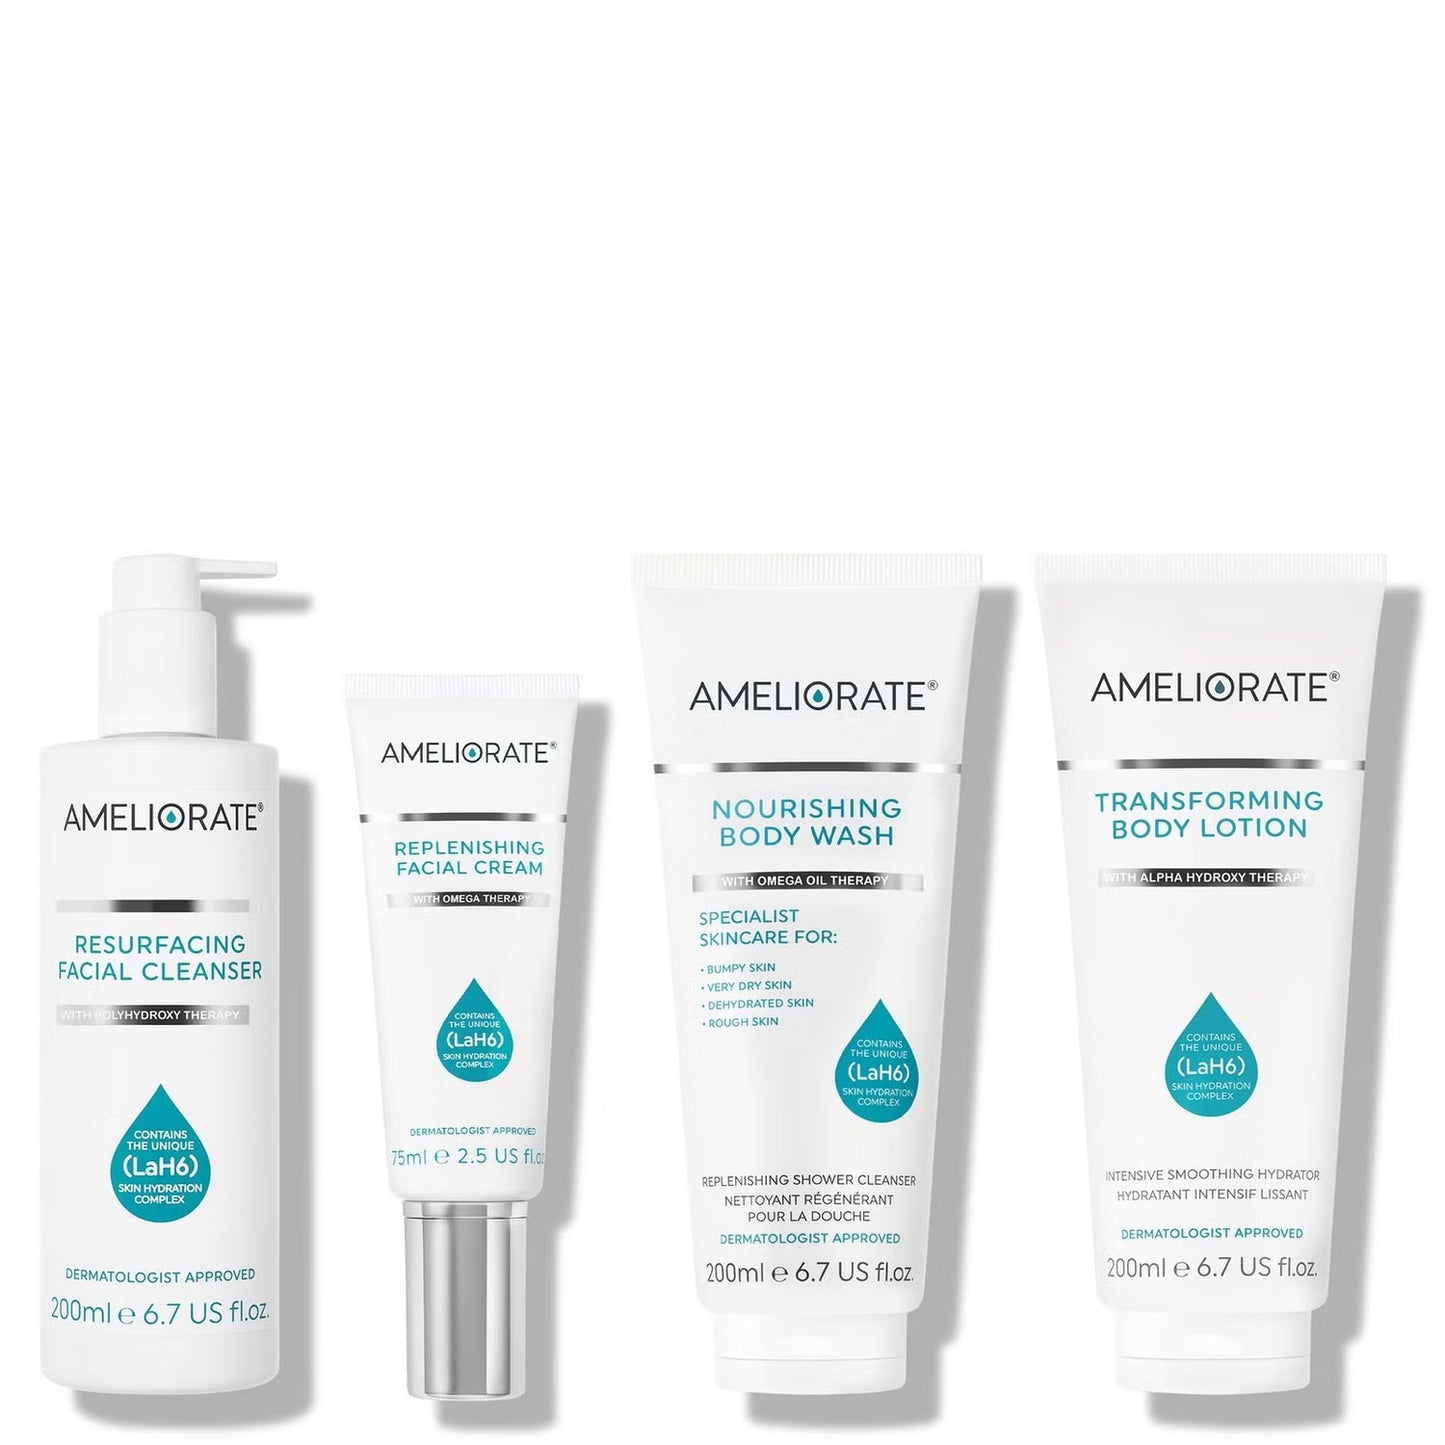 AMELIORATE - Face & Body Dry Skin Bundle